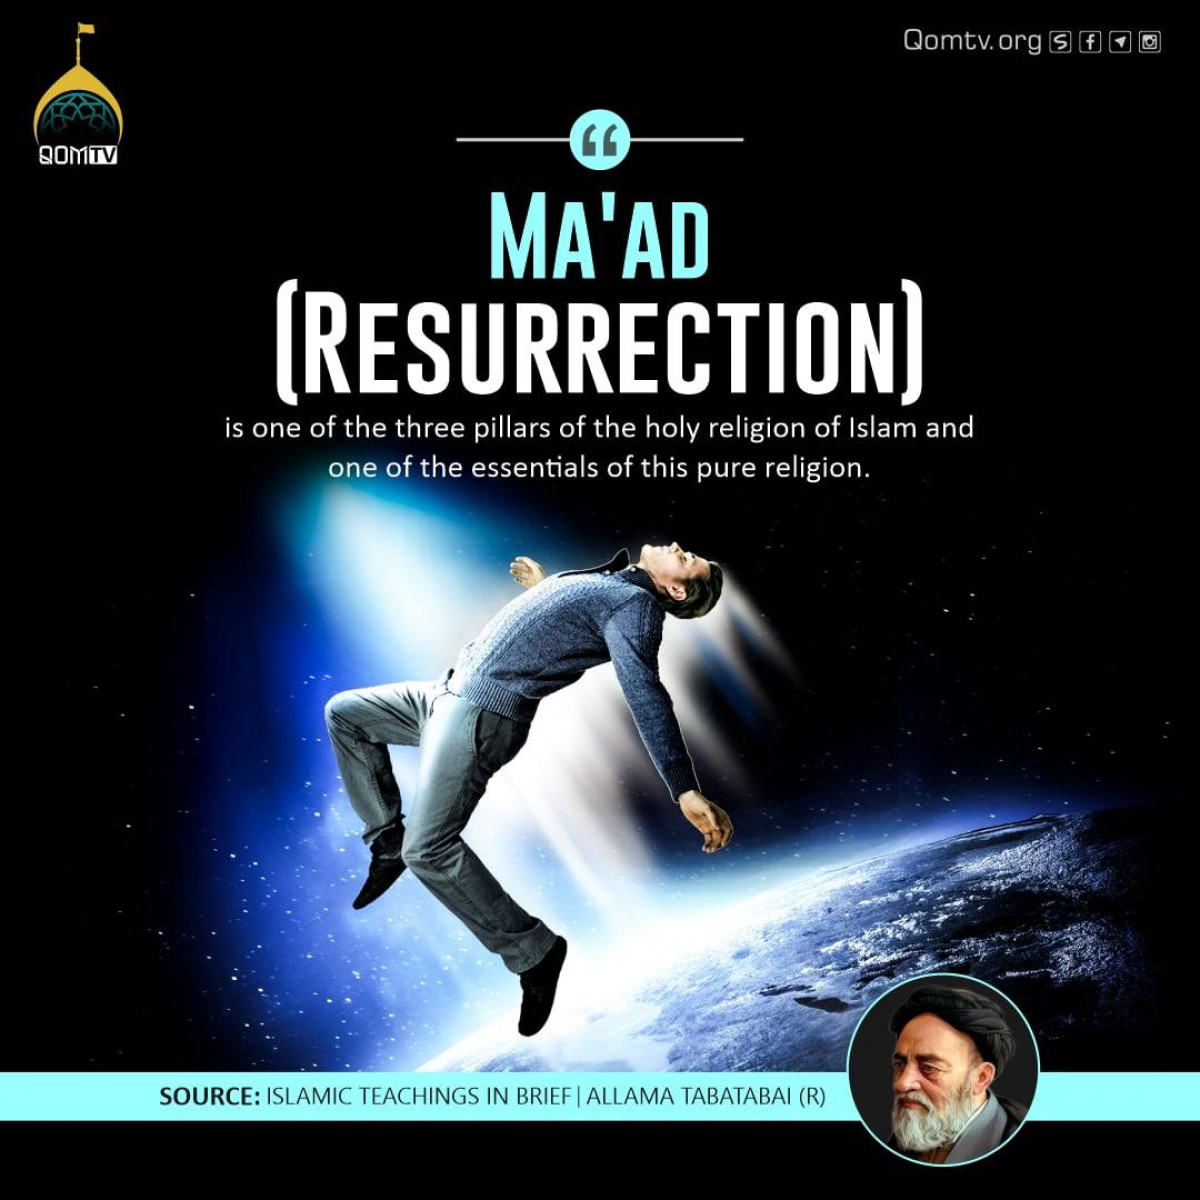 "Ma'ad (Resurrection) is one of the three pillars of the holy religion of Islam and one of the essentials of this pure religion."